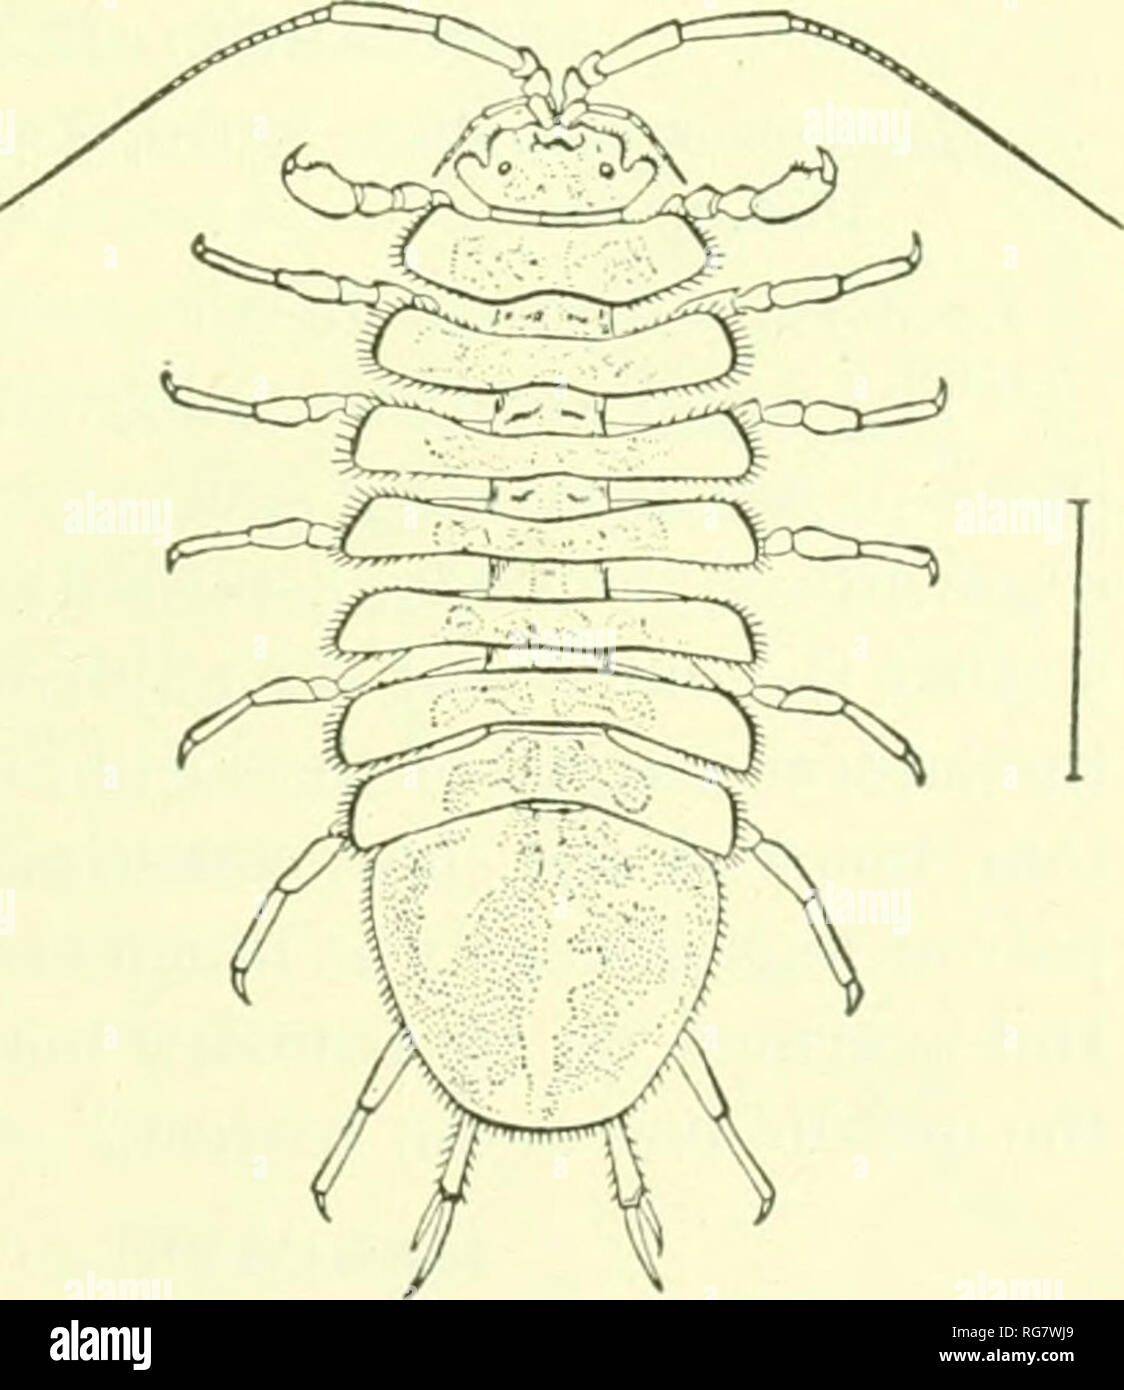 . Bulletin - United States National Museum. Science. ISOPODS OF NORTH AMERICA. 415 which is 4 mm. in length and has the posterior margin widely rounded. The terminal segment is 5 mm. wide at the base. The uropoda are half as long as the terminal abdominal segment. The peduncle is 1 mm. long. The outer branch is 1 mm. long. The inner branch is a very little longer than the outer branch. In the female the first ple- o})oda are attached close together as in the preceding species. The first pair of legs are strongly prehensile and have the propodus greatl}' dilated and the inferior margin armed wi Stock Photo